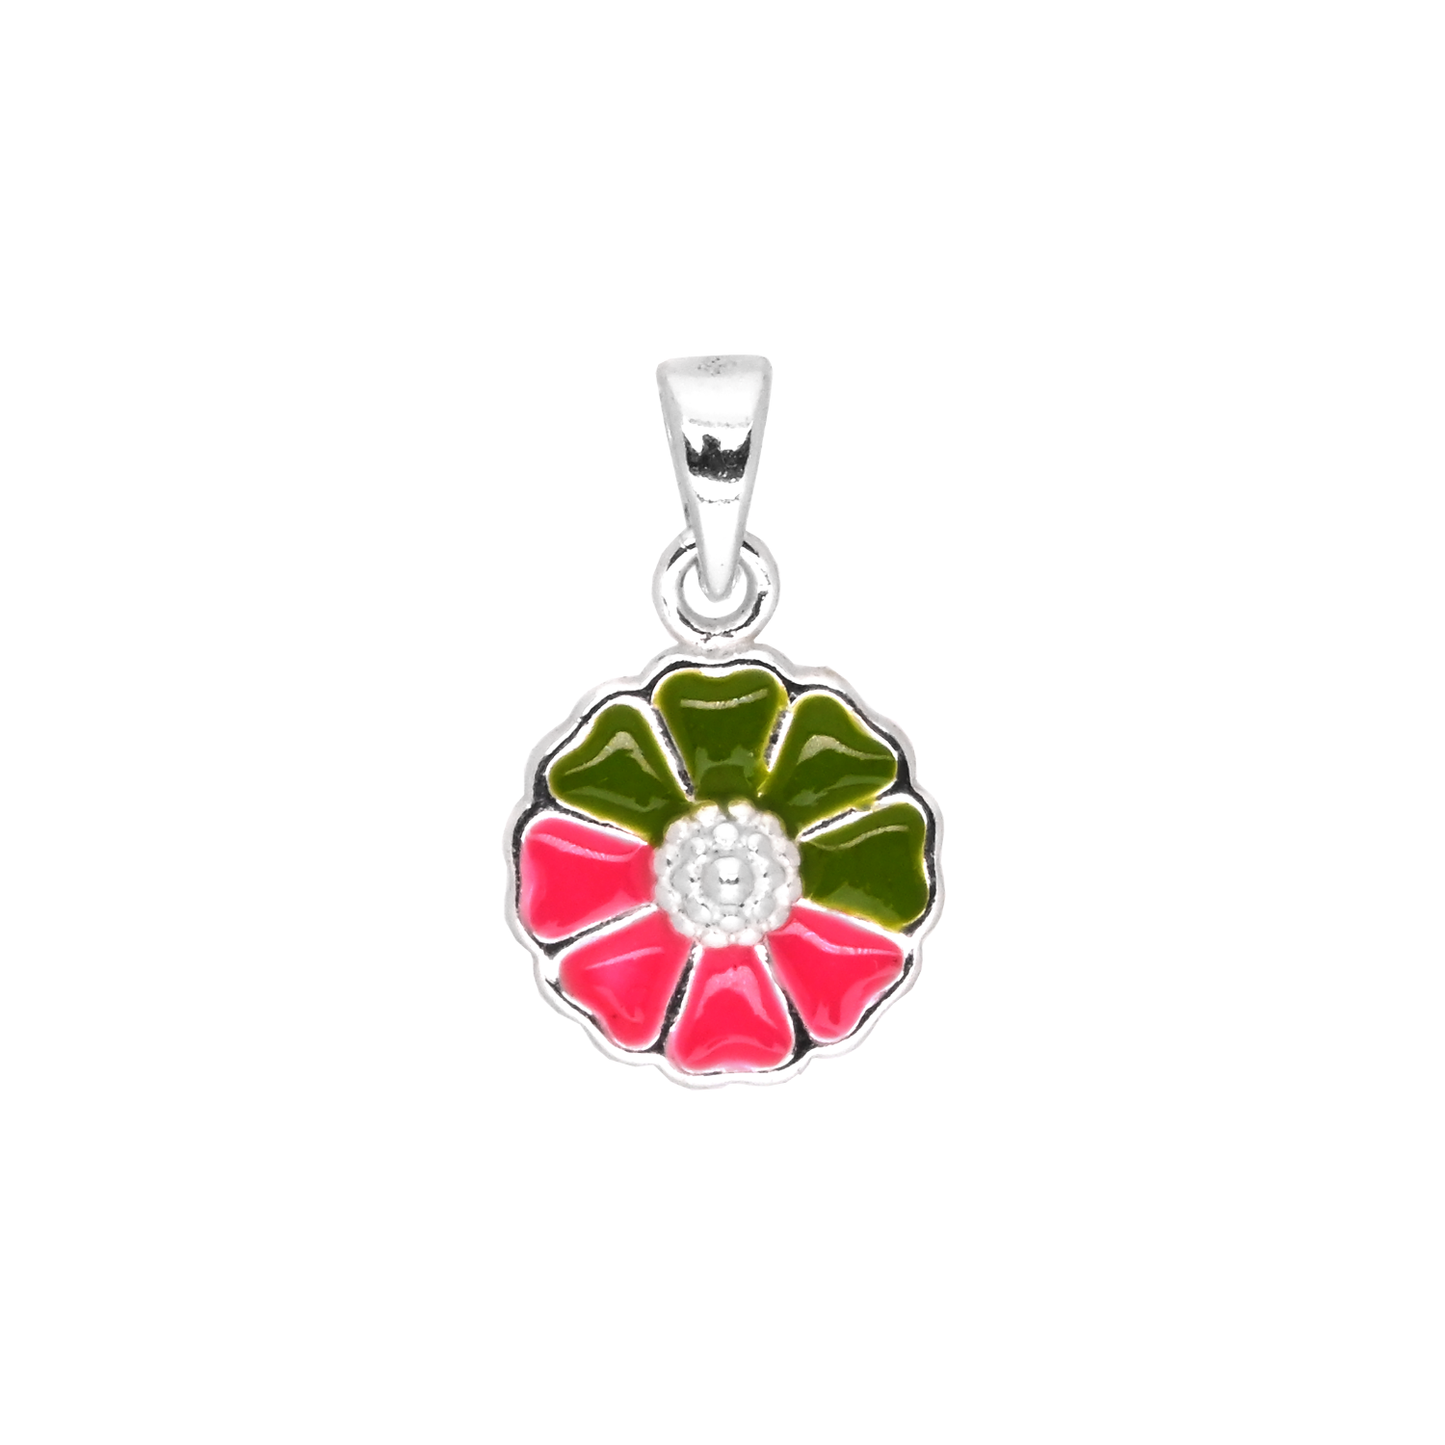 Ontique 925 Silver Striped Round Shaped Pendant For Kids